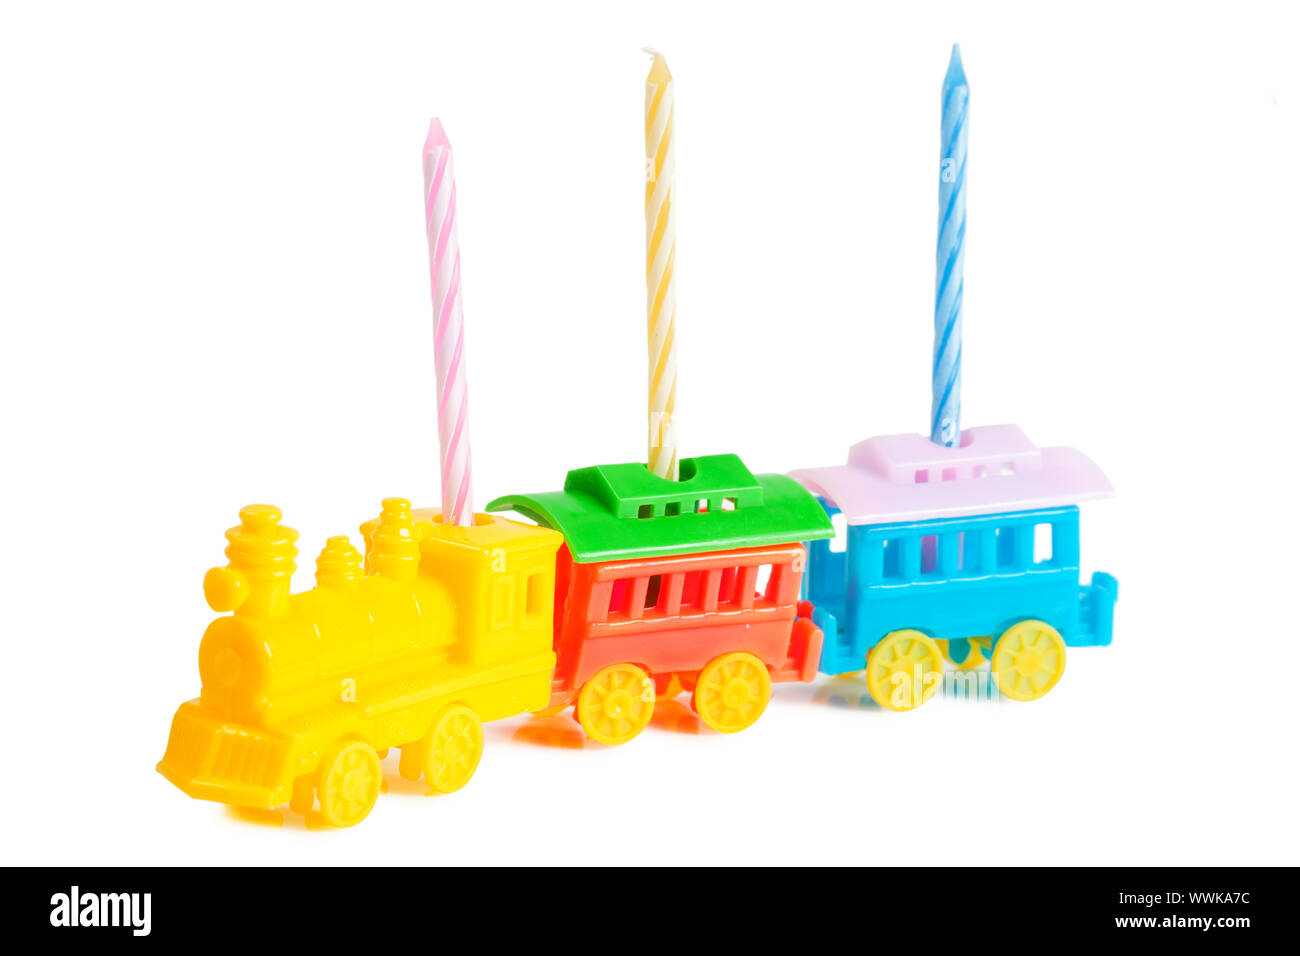 Three birthday candles in a train-shaped support Stock Photo